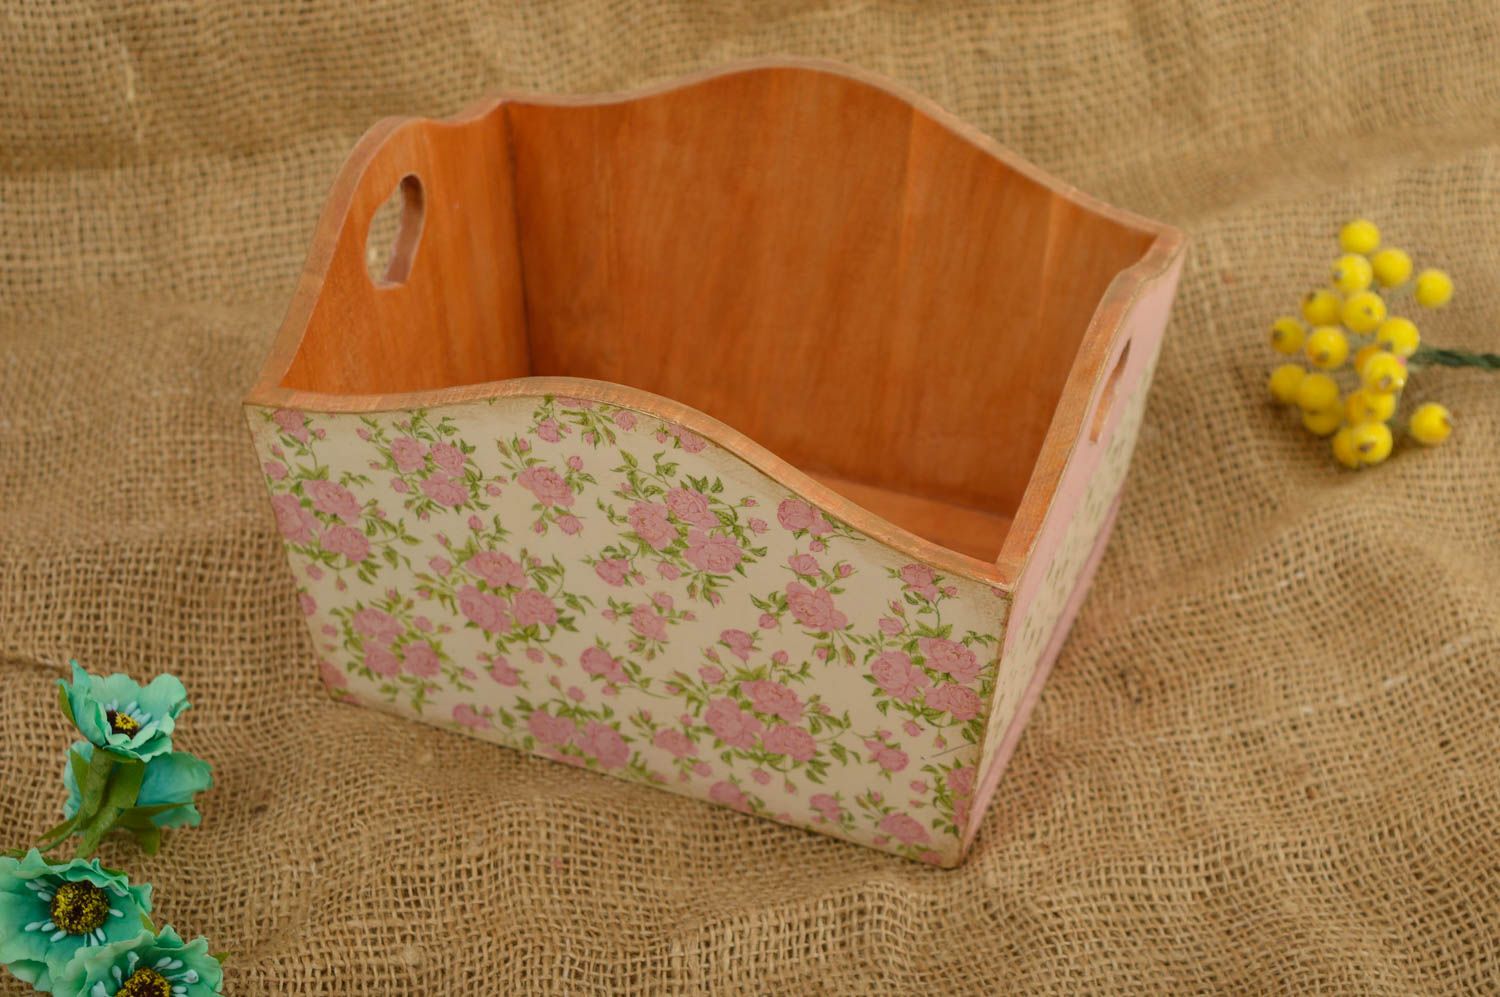 Handmade decorative box for home box for little things home decor ideas photo 1